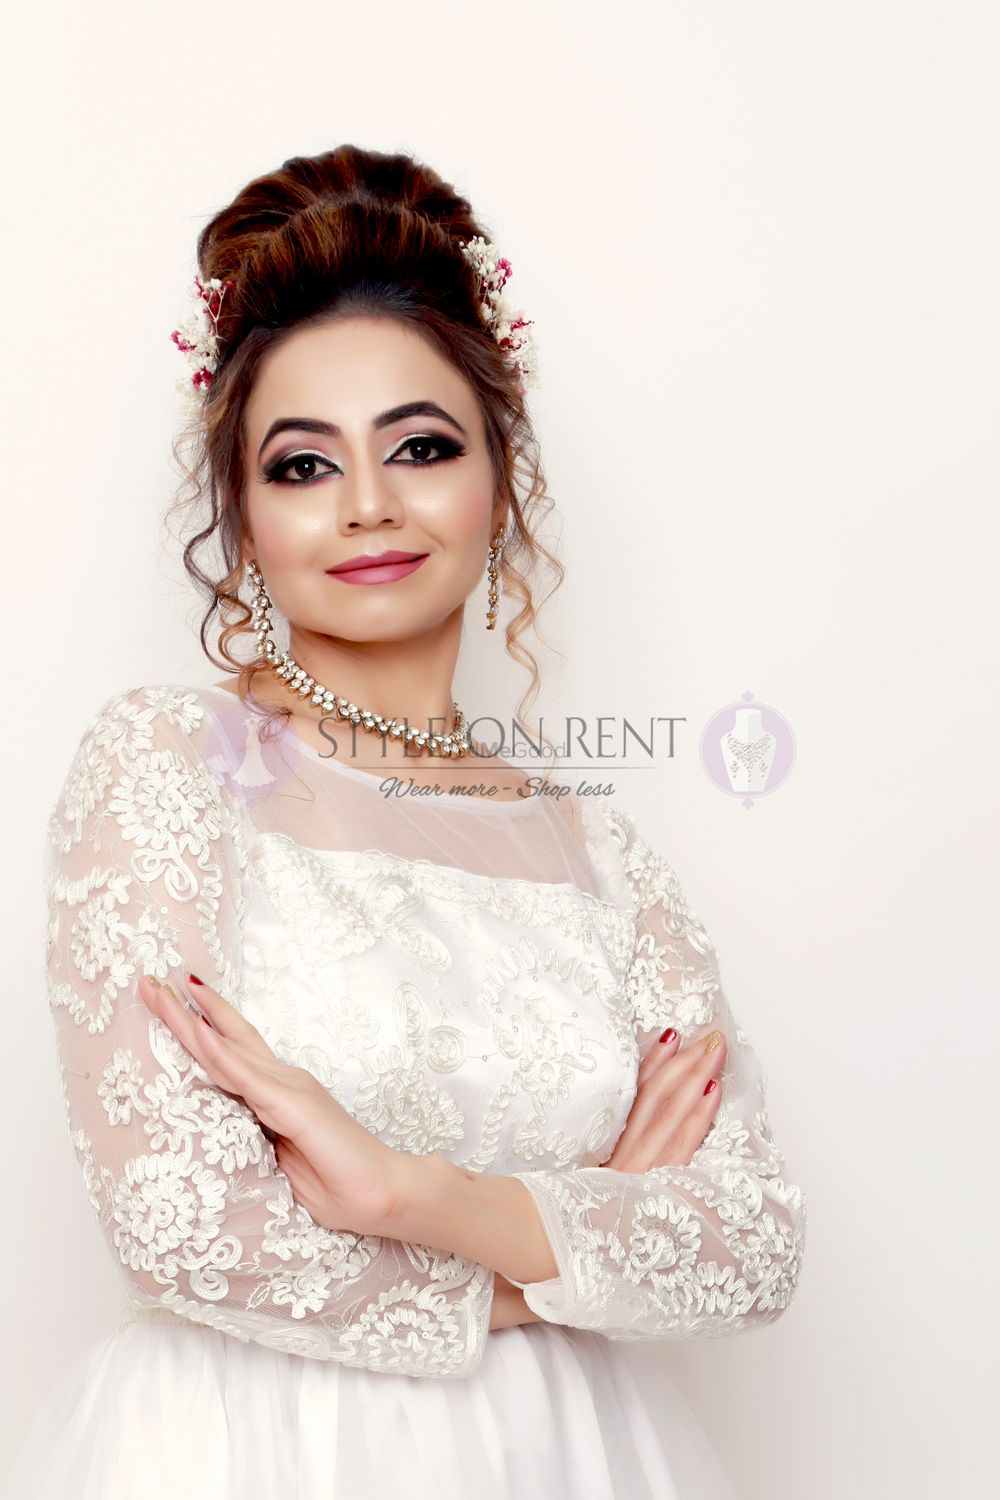 Photo By Styles On Rent - Bridal Wear